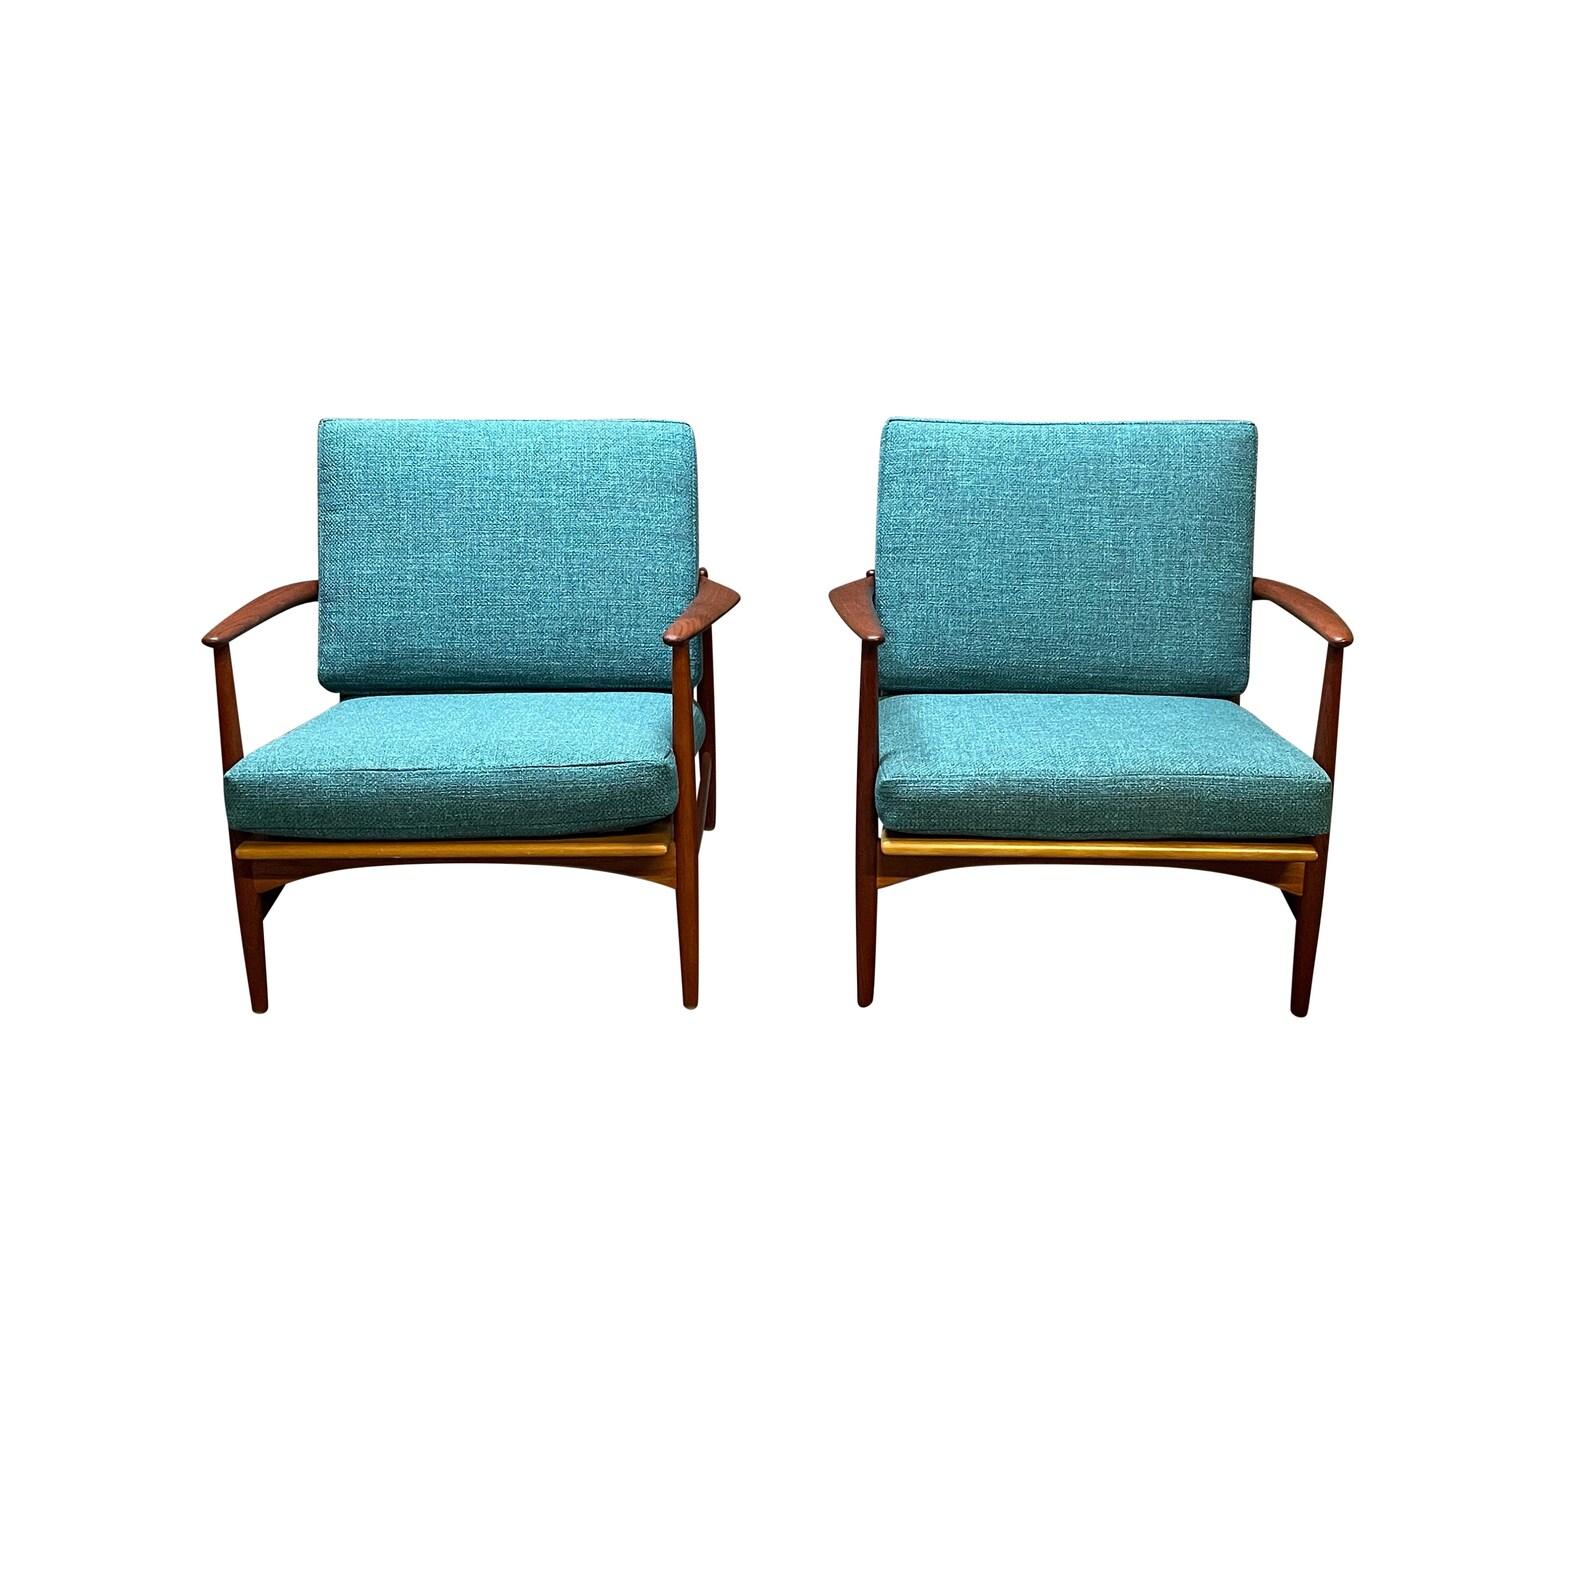 Pair of Danish lounge chairs designed by Kofod Larsen and manufactured by Selig in Denmark, 1960's. This pair features beautiful tapered arm rests, curved sculptured back, brand new teal cushions, upholstery and strapping all on a solid teak frame.